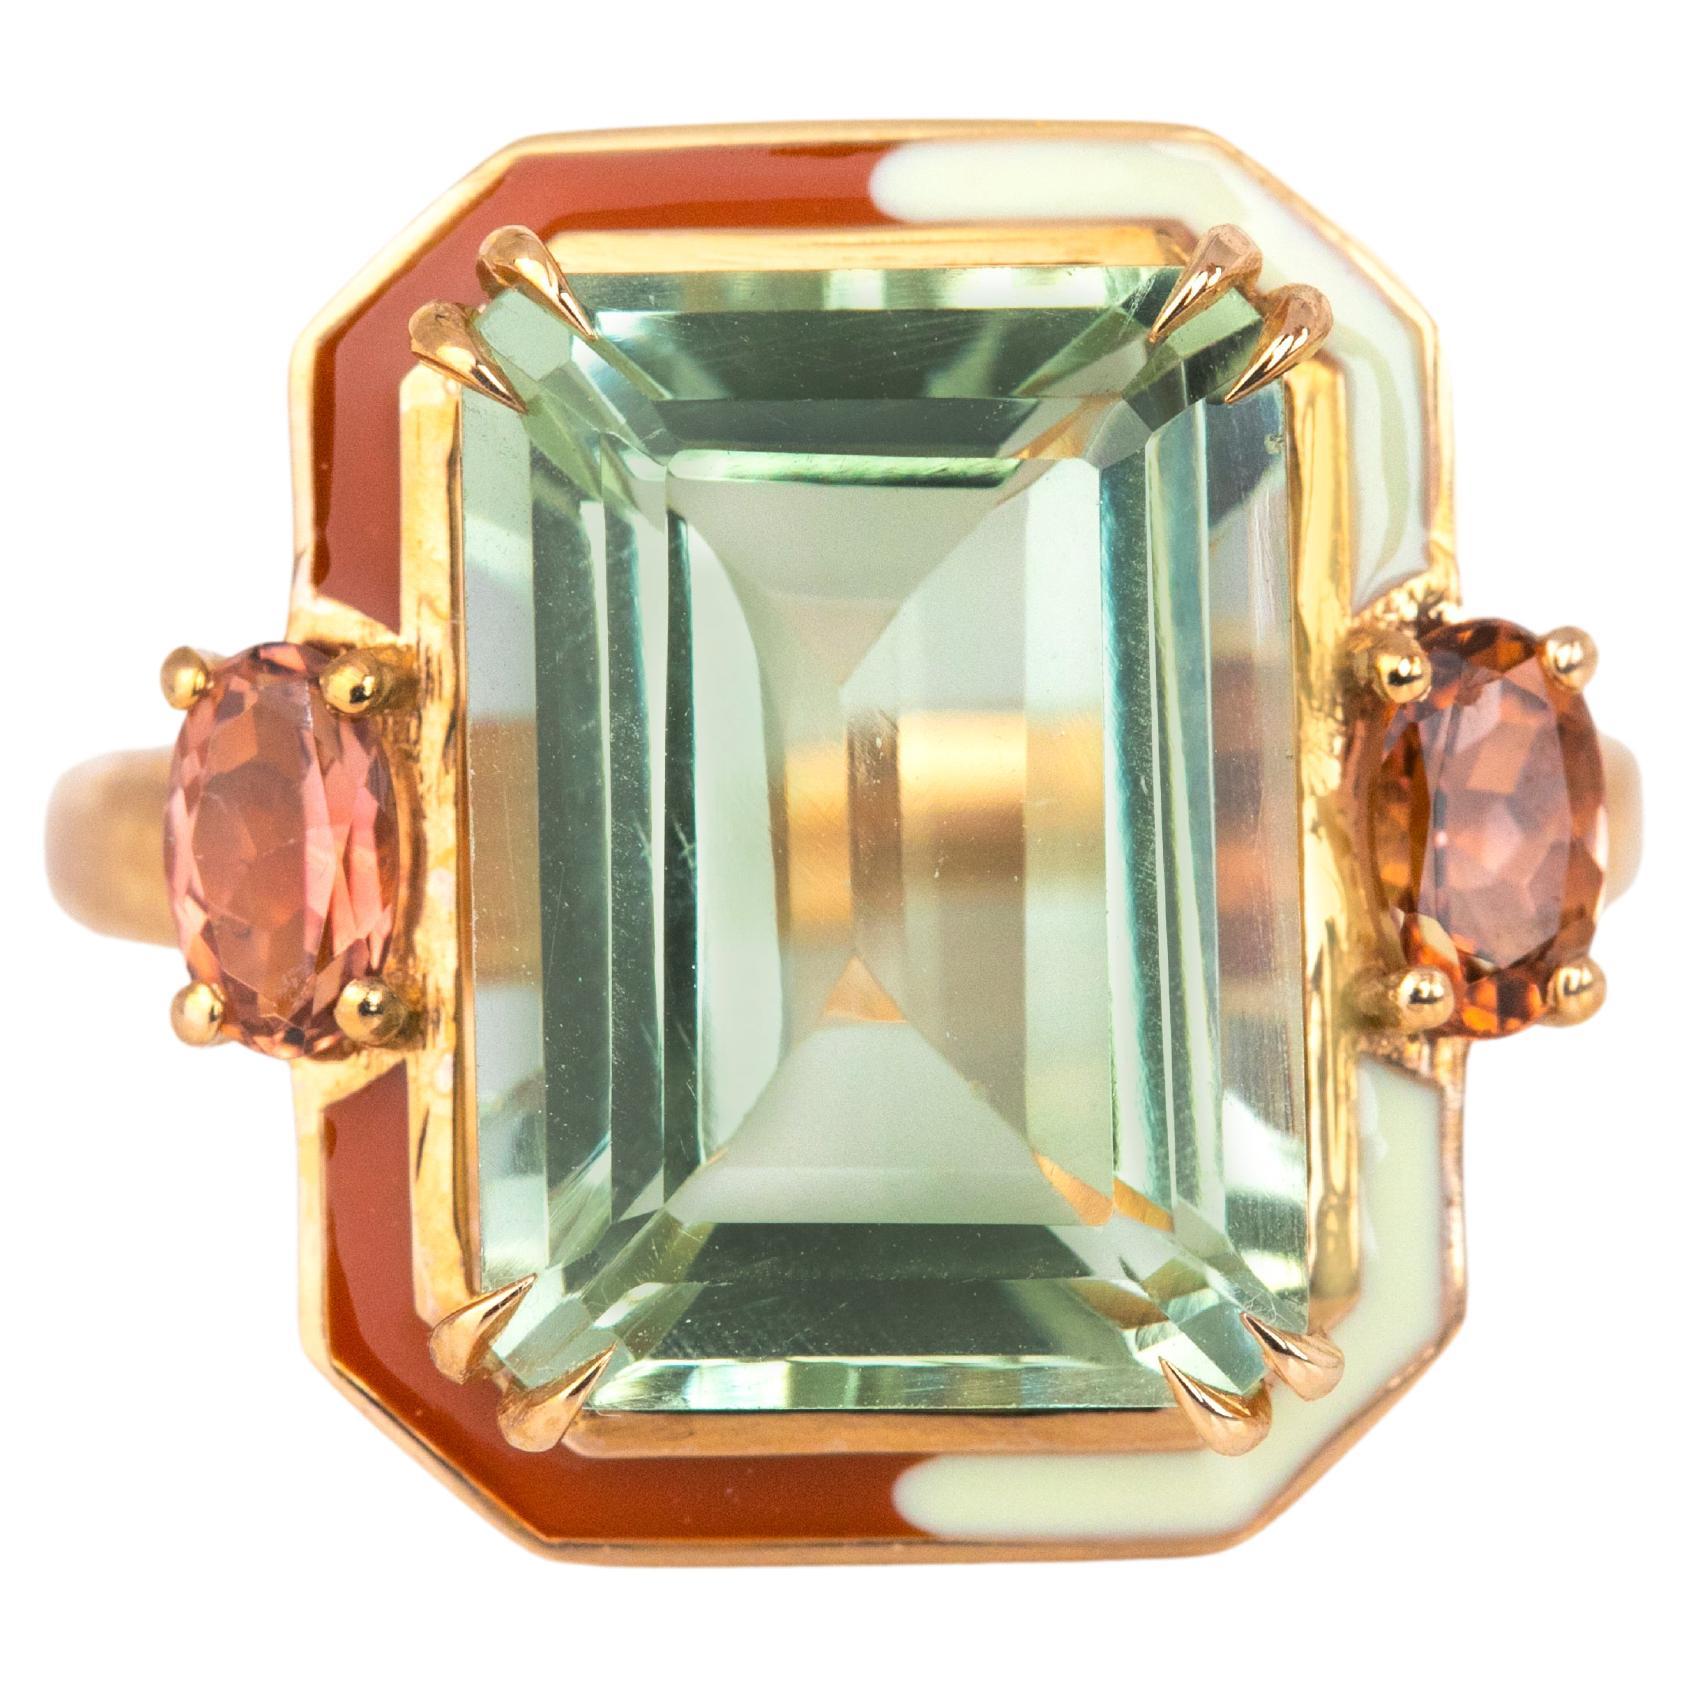 For Sale:  Artdeco Style Ring, 14k Solid Gold, Green Amethyst and Pink Tourmaline Stone Ring